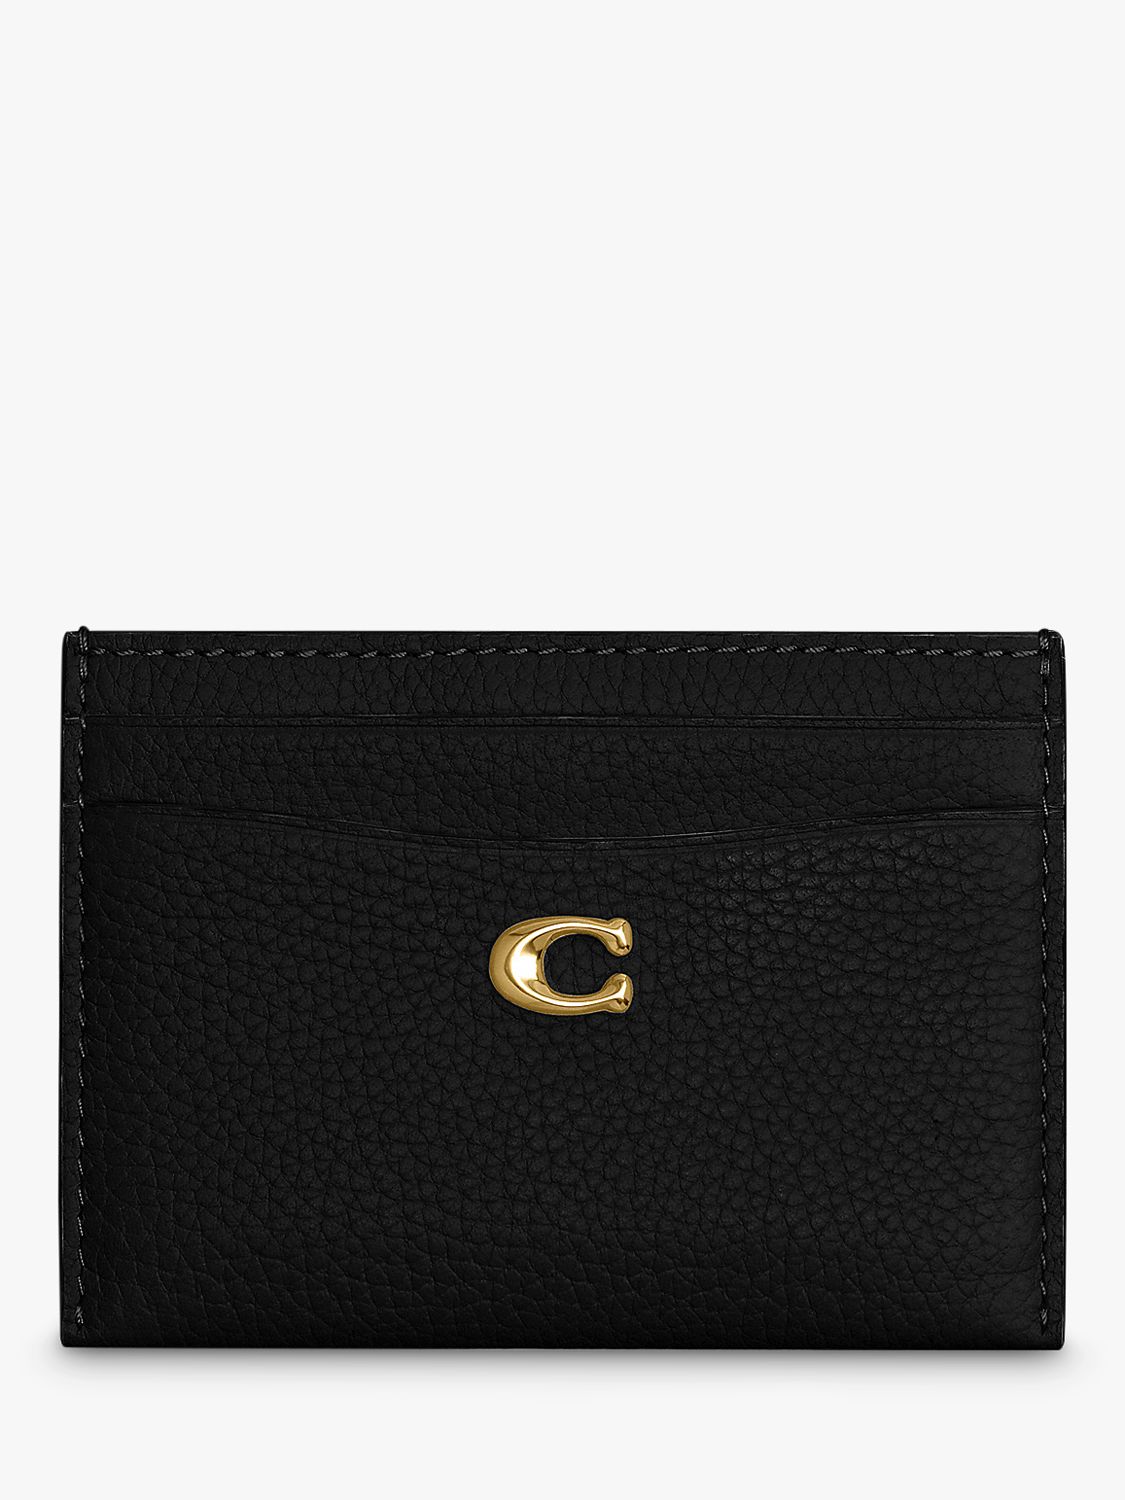 Coach Pebble Leather Card Holder, Black at John Lewis & Partners